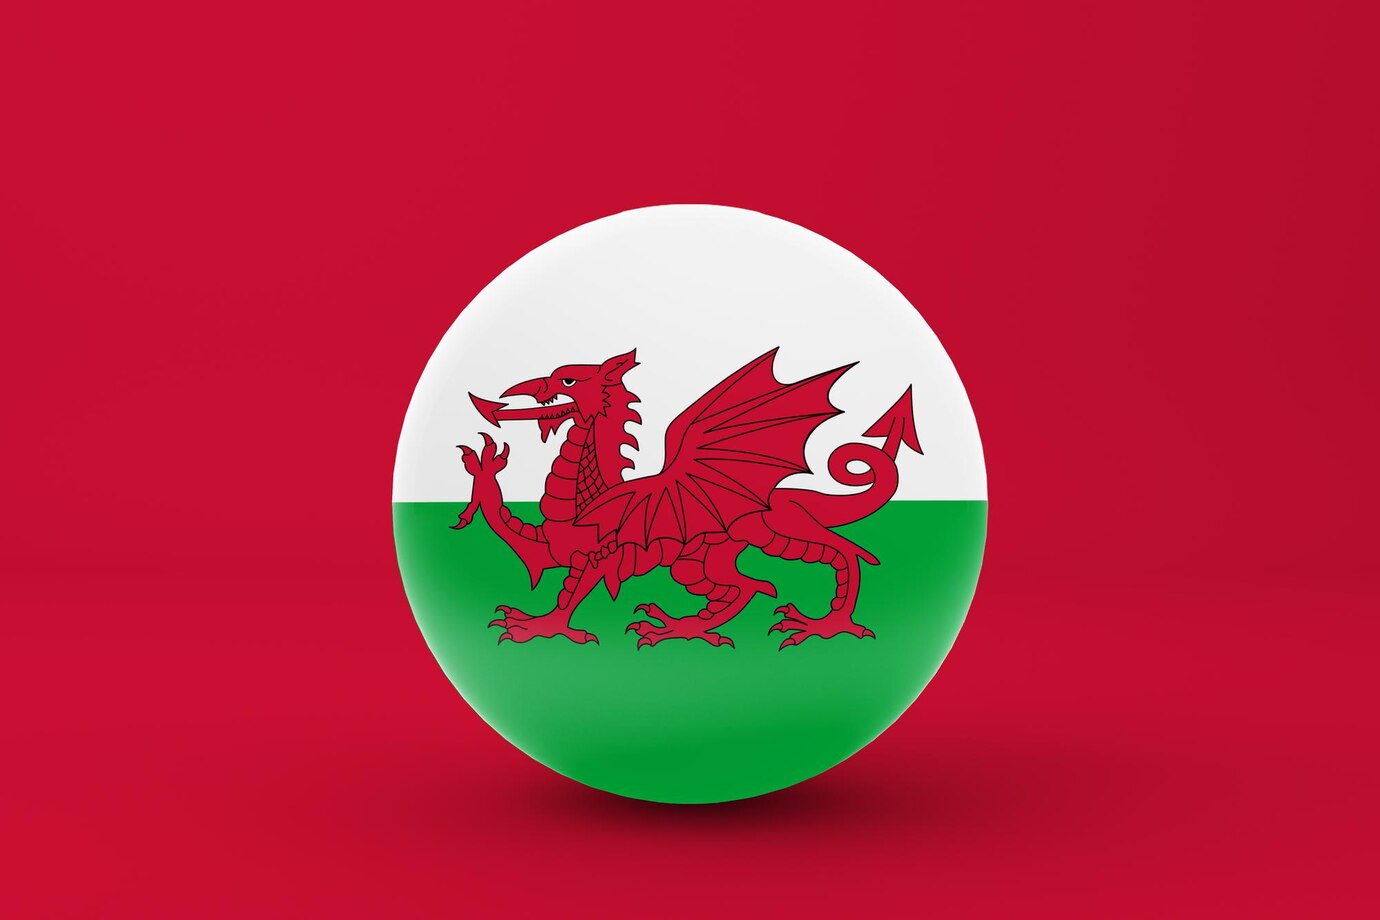 Wales history timeline and its Integral Role in Britain